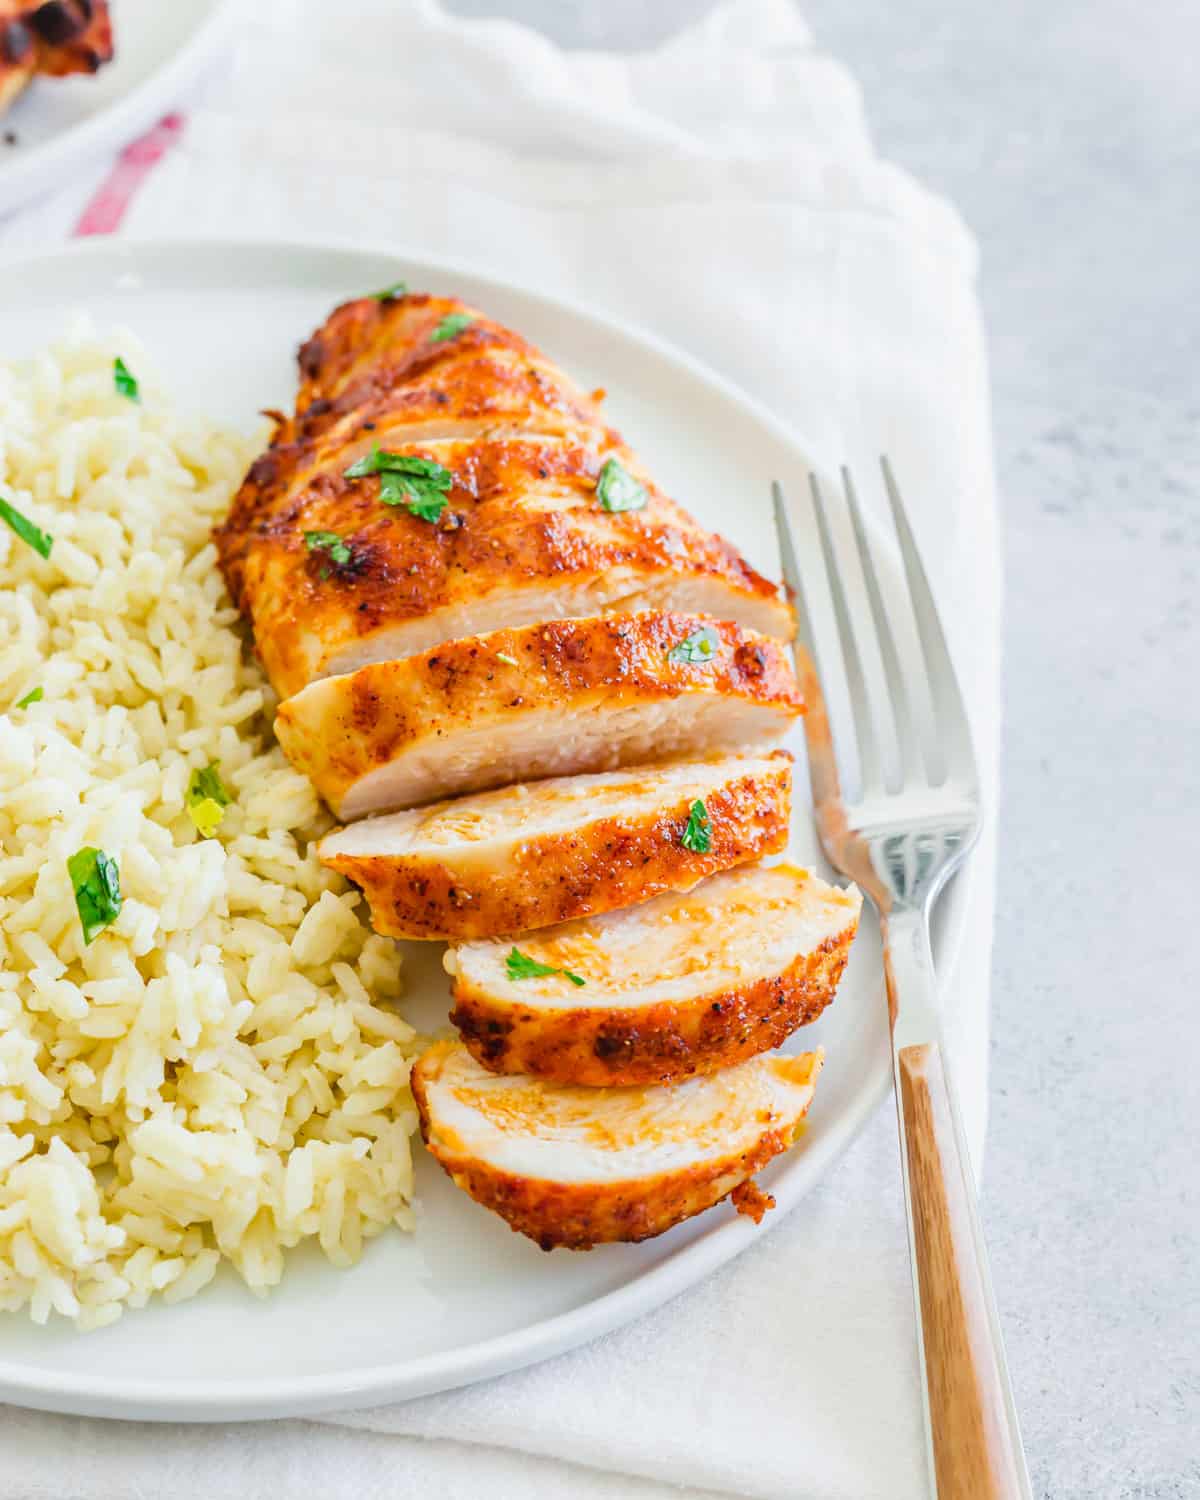 Air fryer frozen chicken breast recipe with simple seasoning served on a plate with rice.